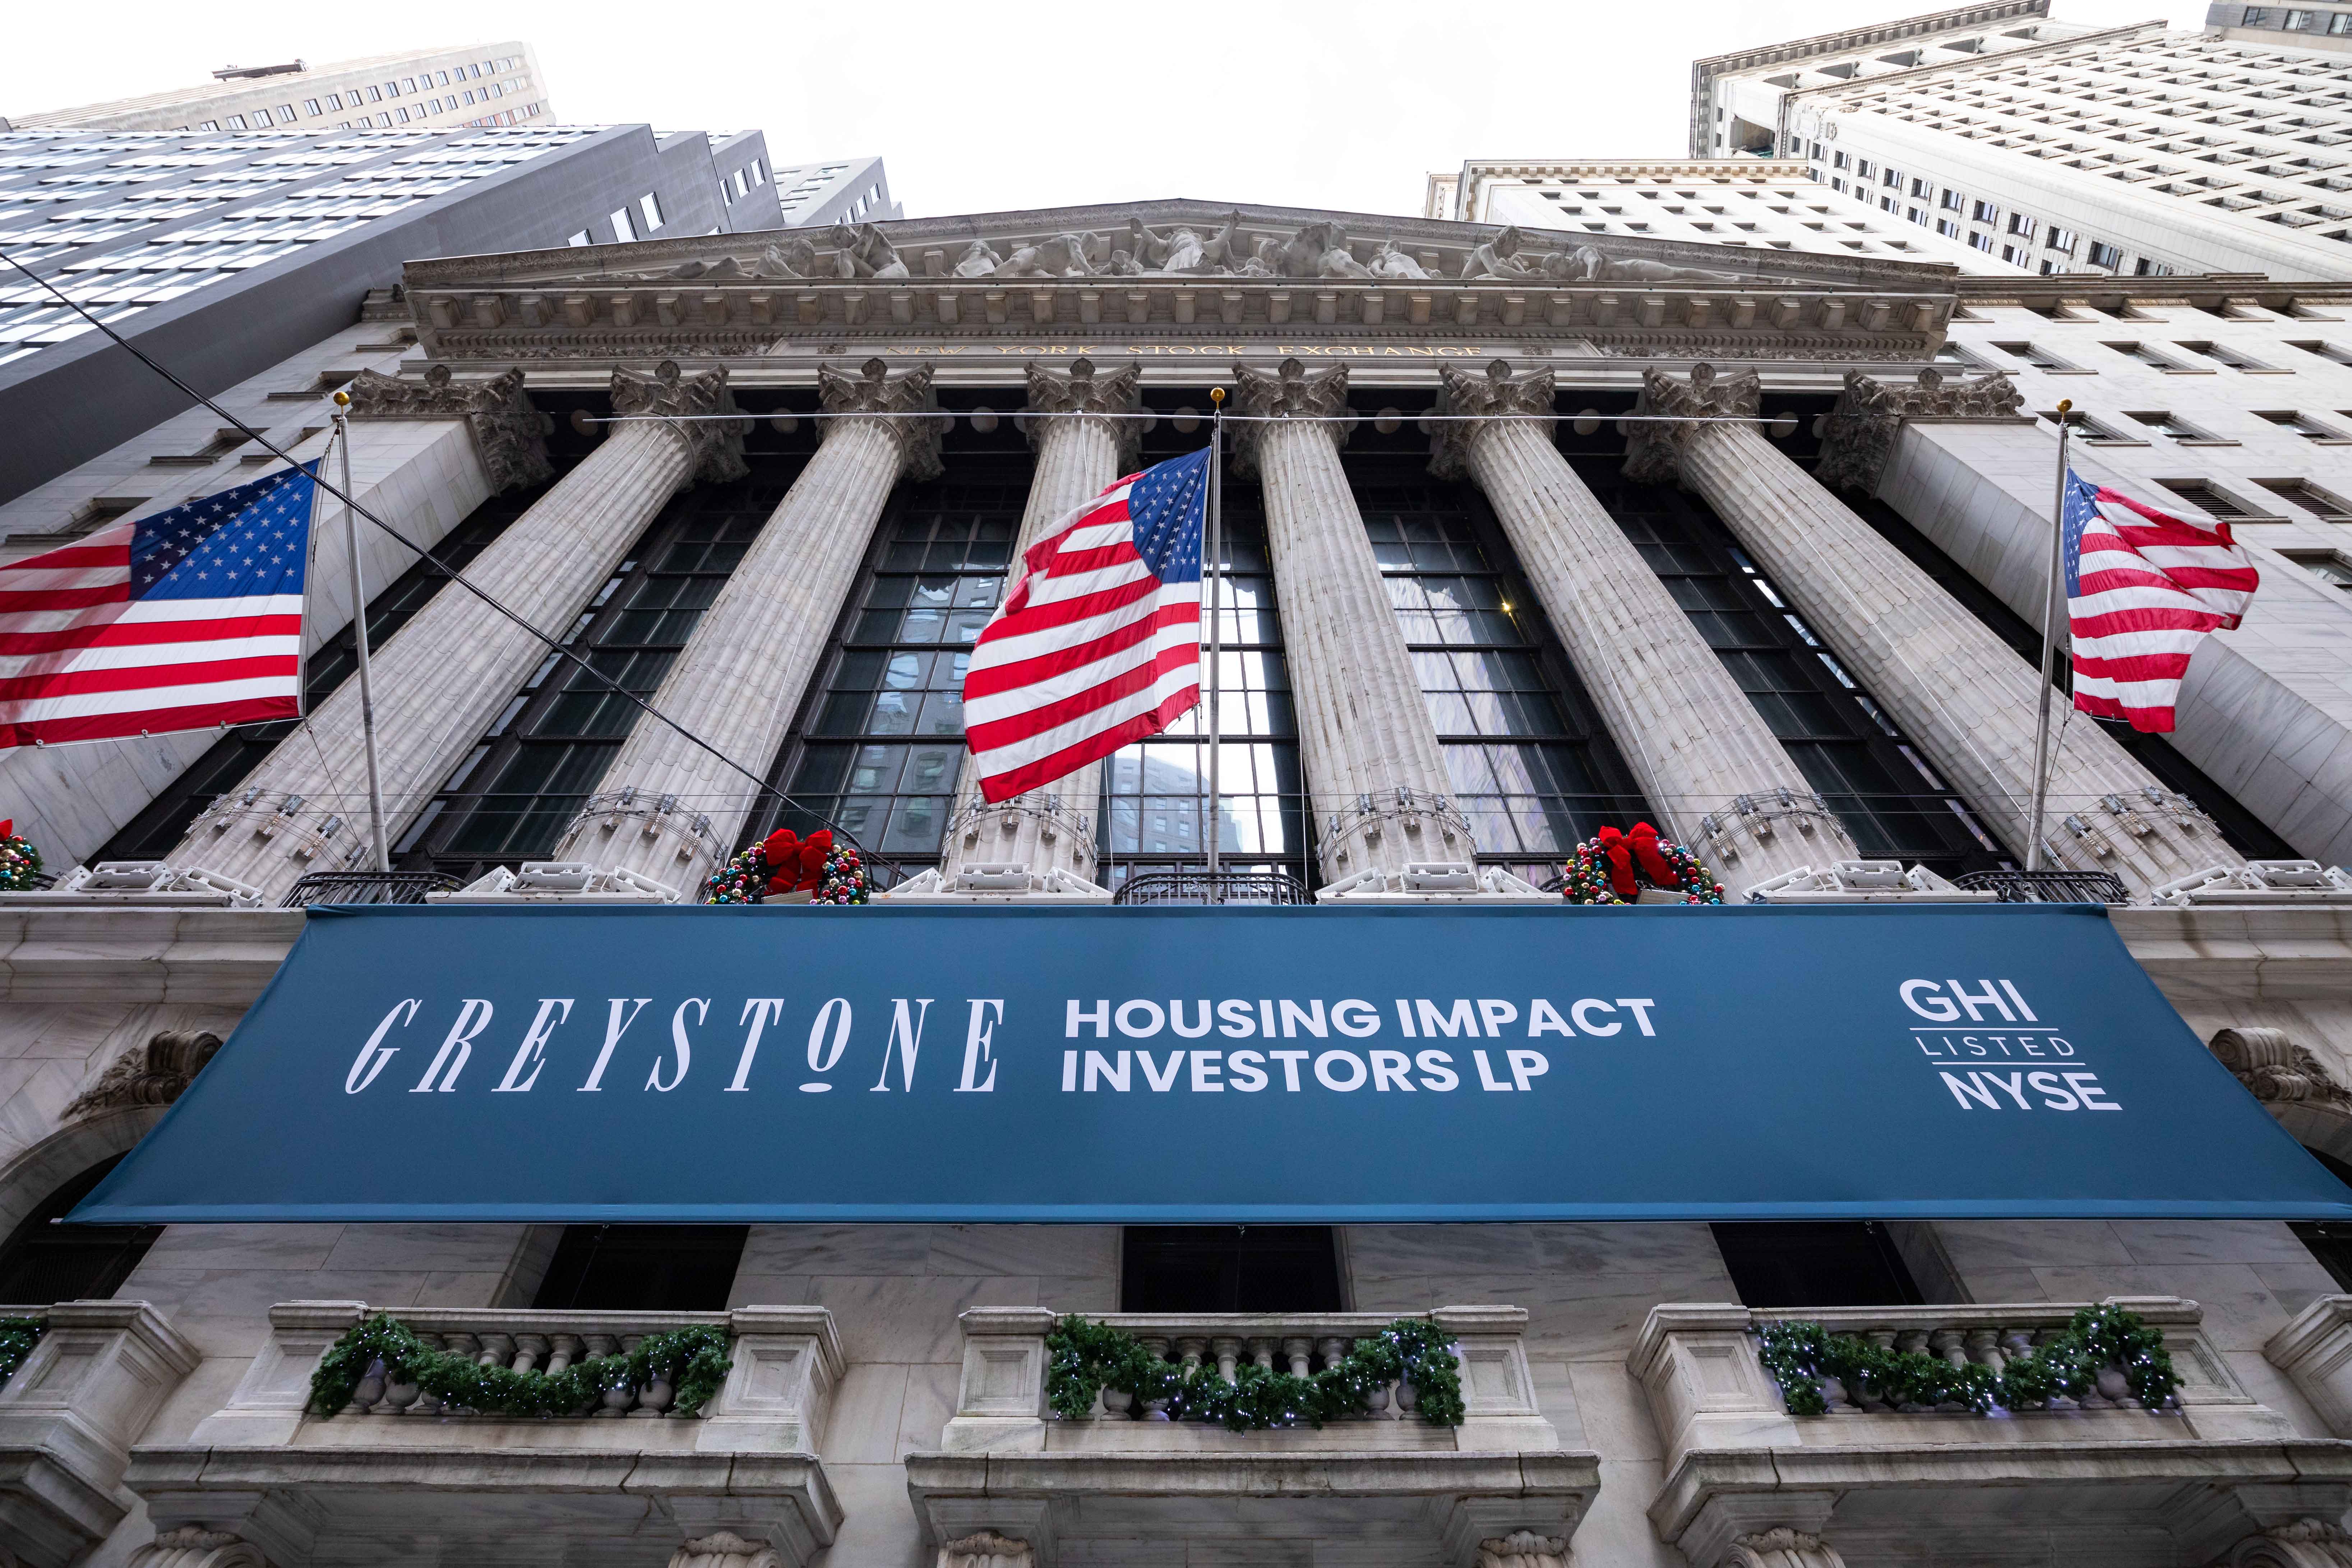 Greystone Housing Impact Investors LP rings the opening bell on NYSE on December 12, 2022.